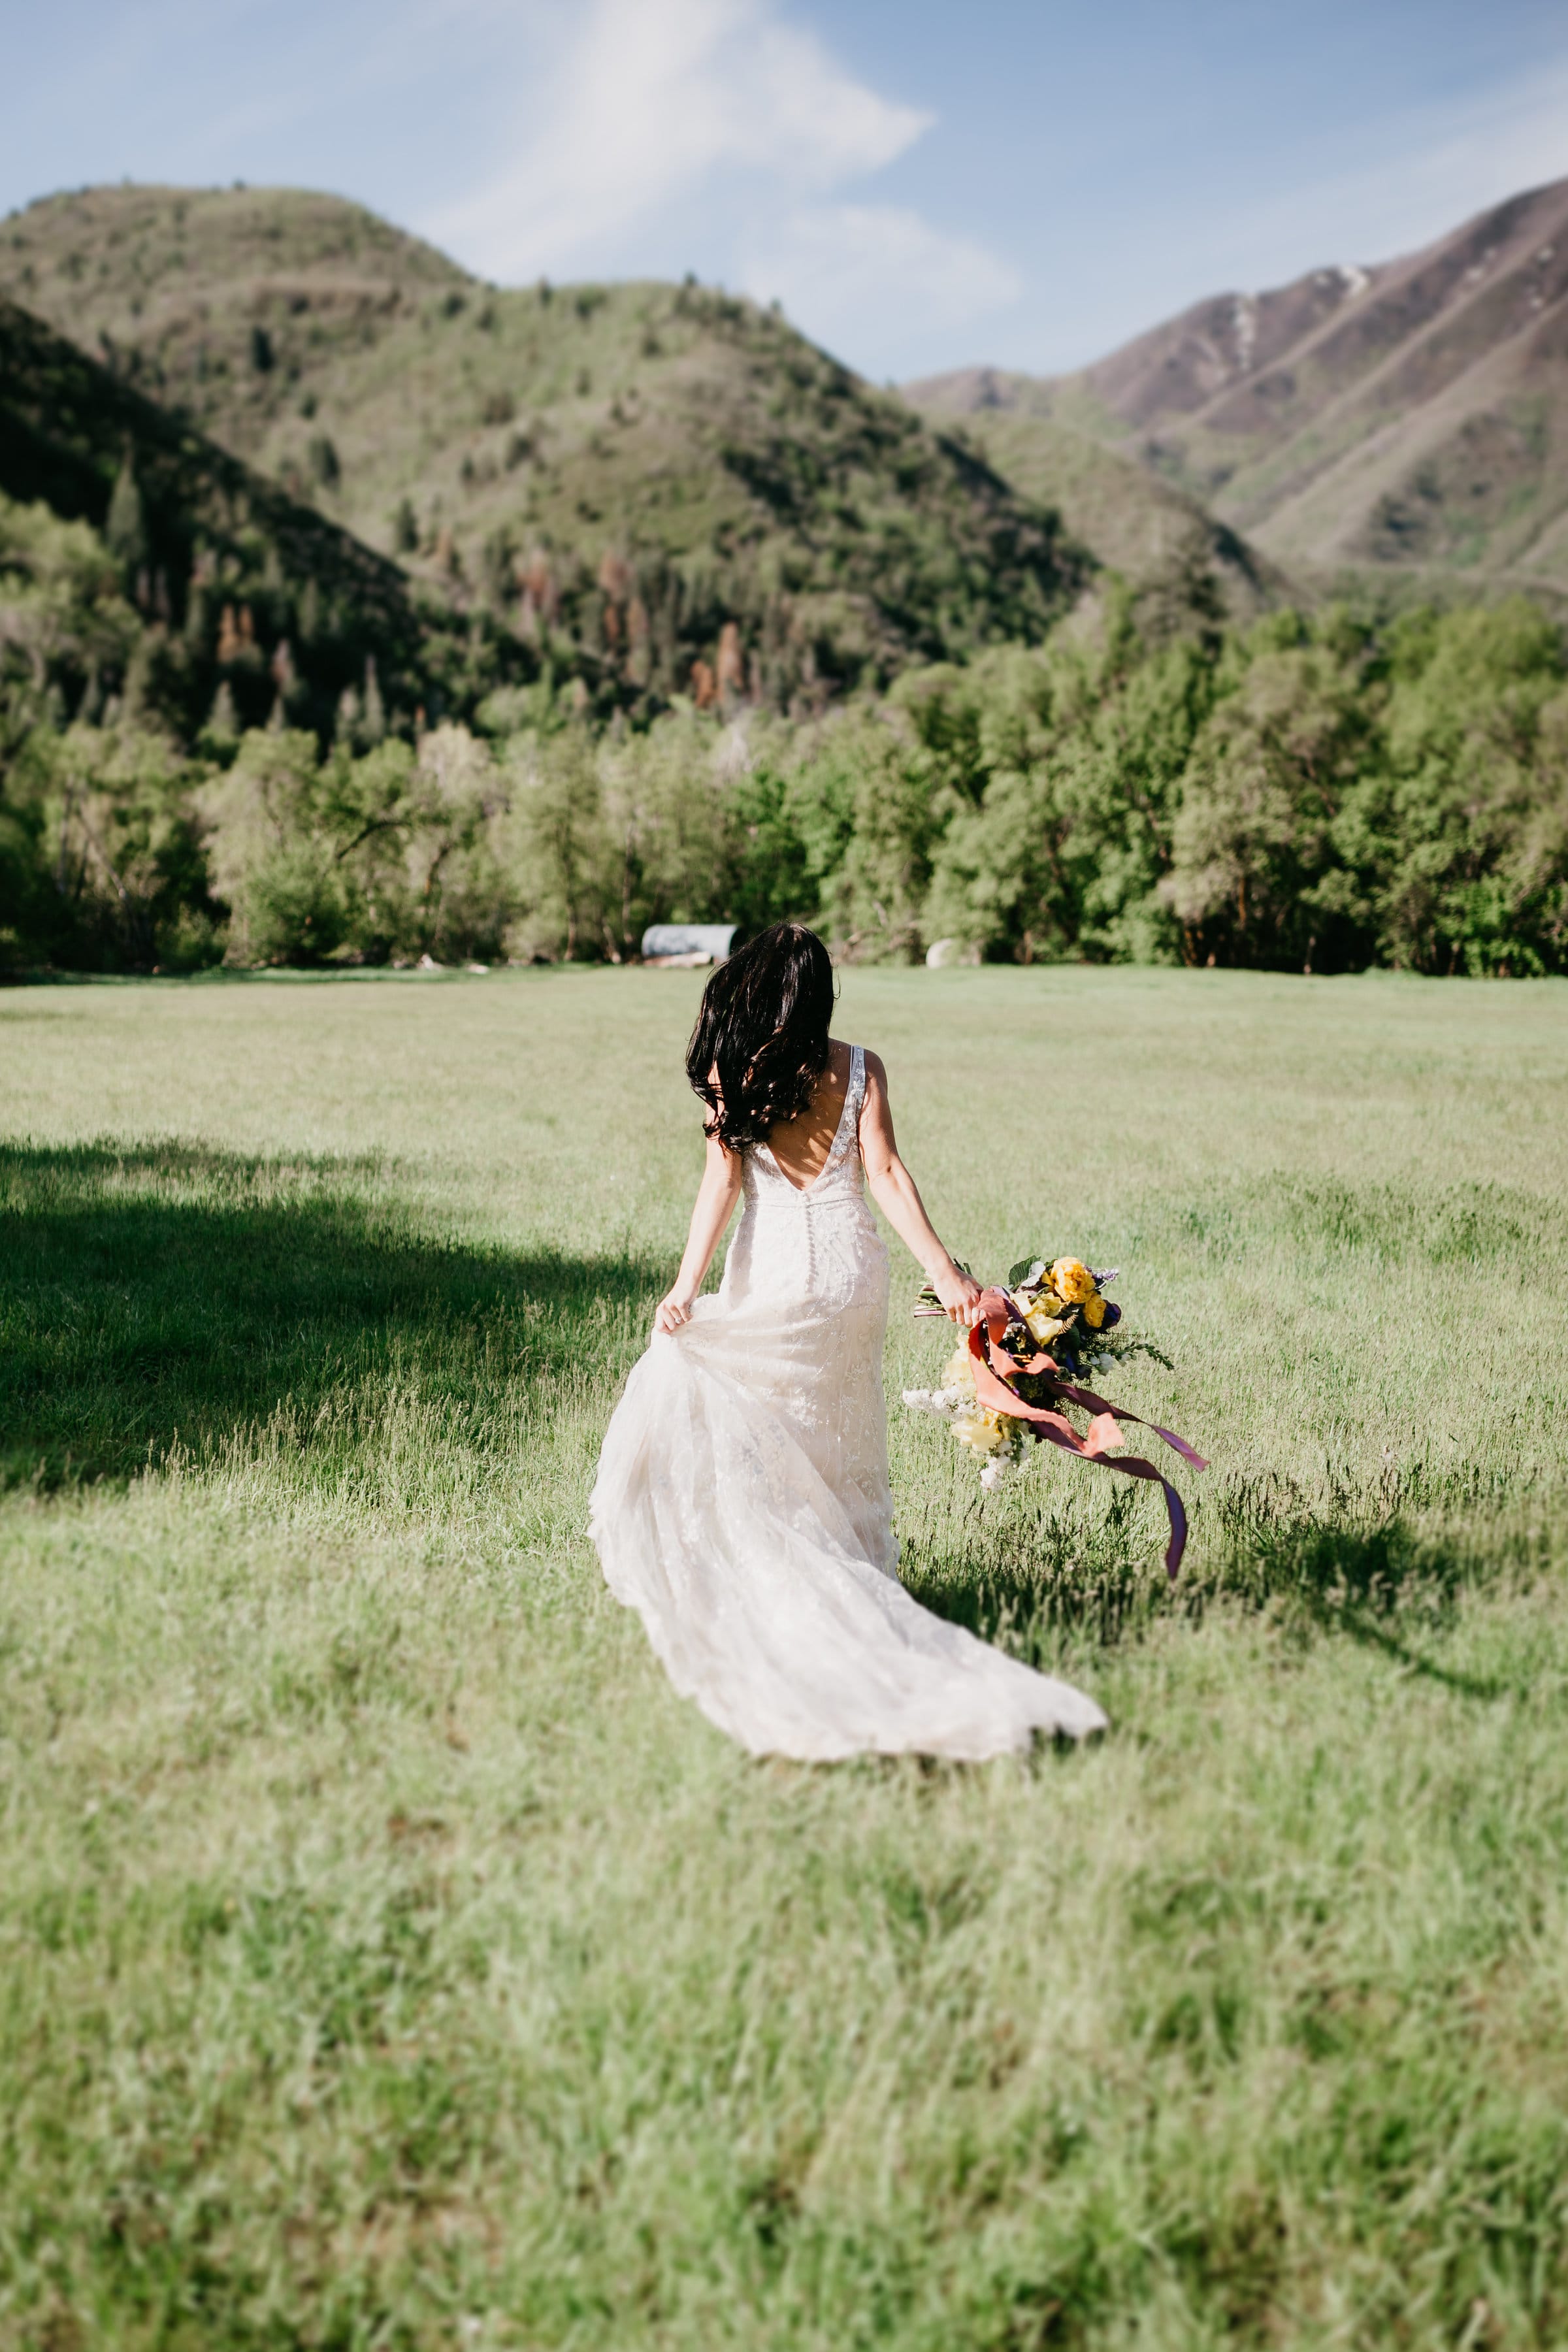 Earthy and Romantic Styled Shoot with Breathtaking Florals in Outdoor Wedding | Maggie Sottero's Jorie wedding dress